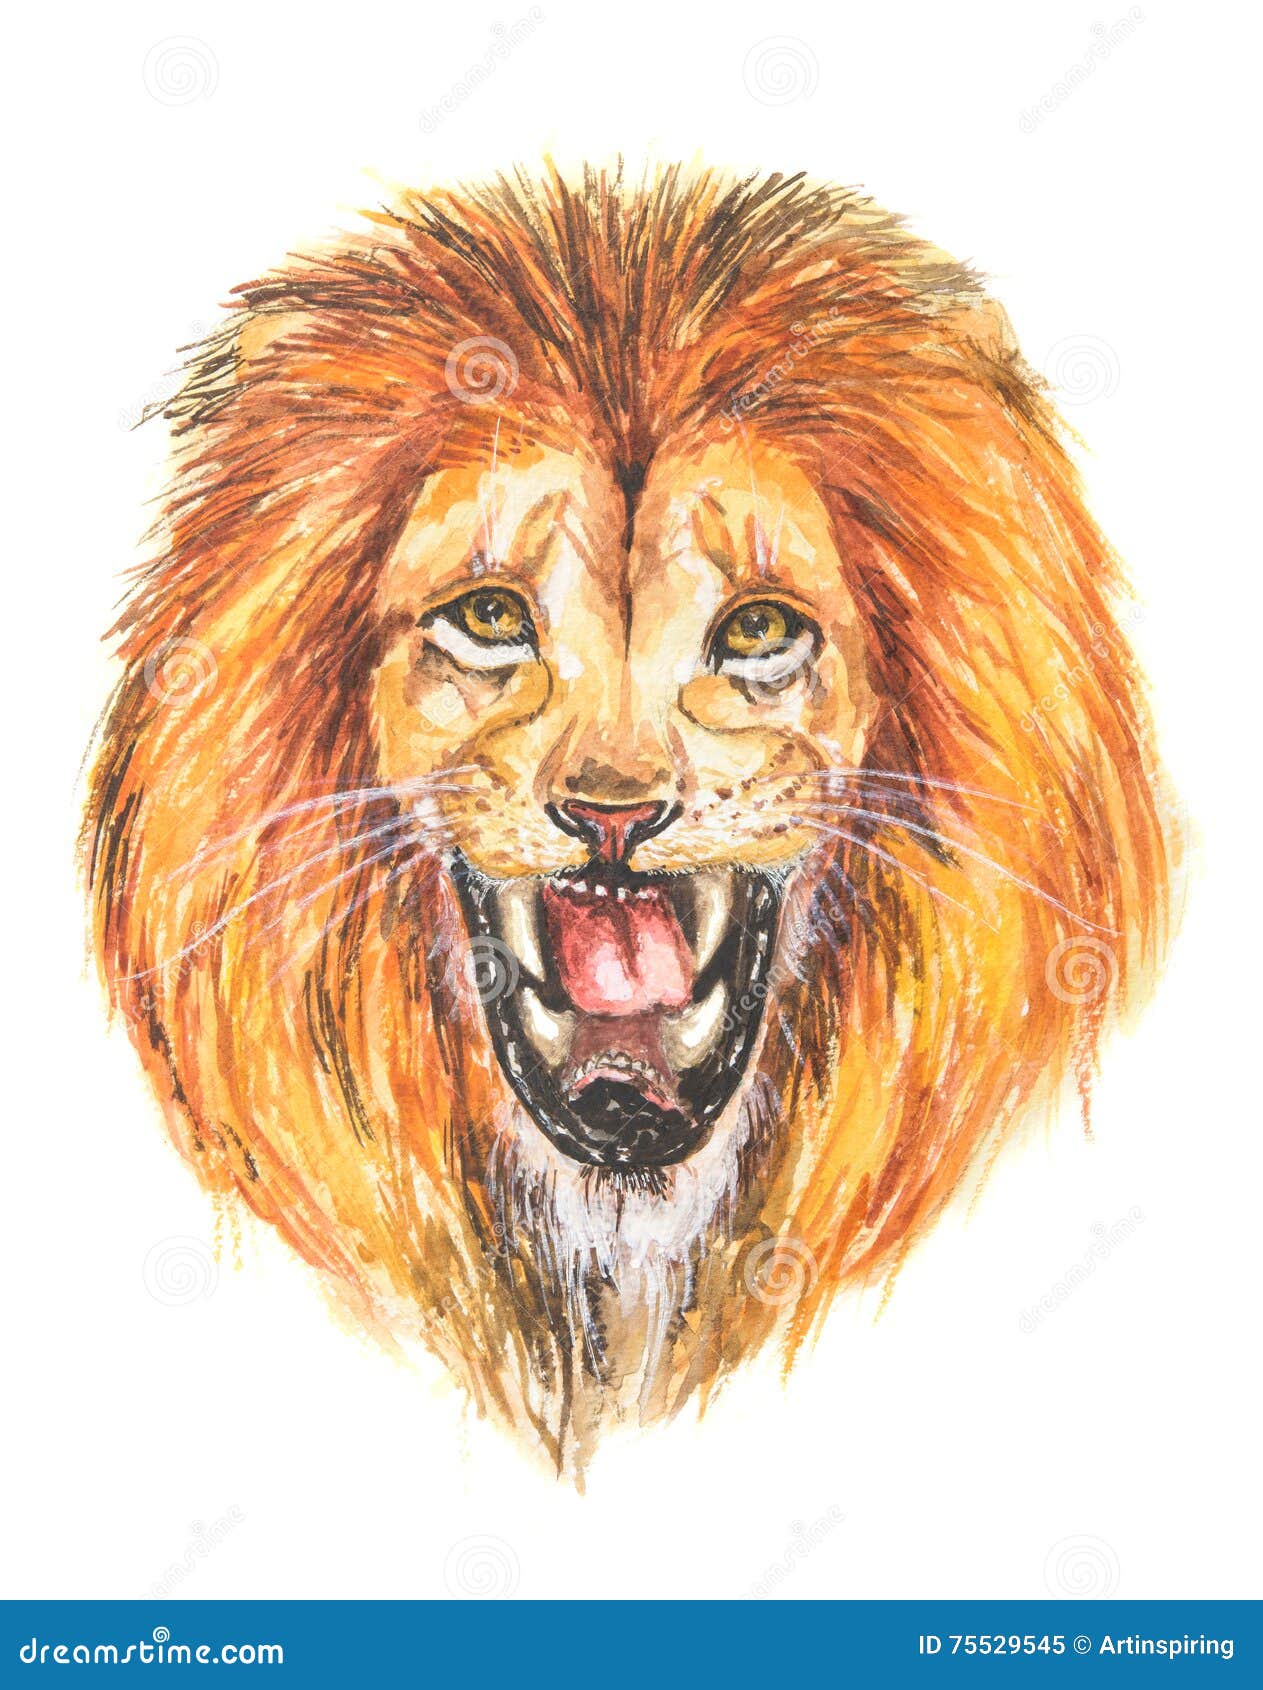 Lion Drawing by DannyHouse on DeviantArt